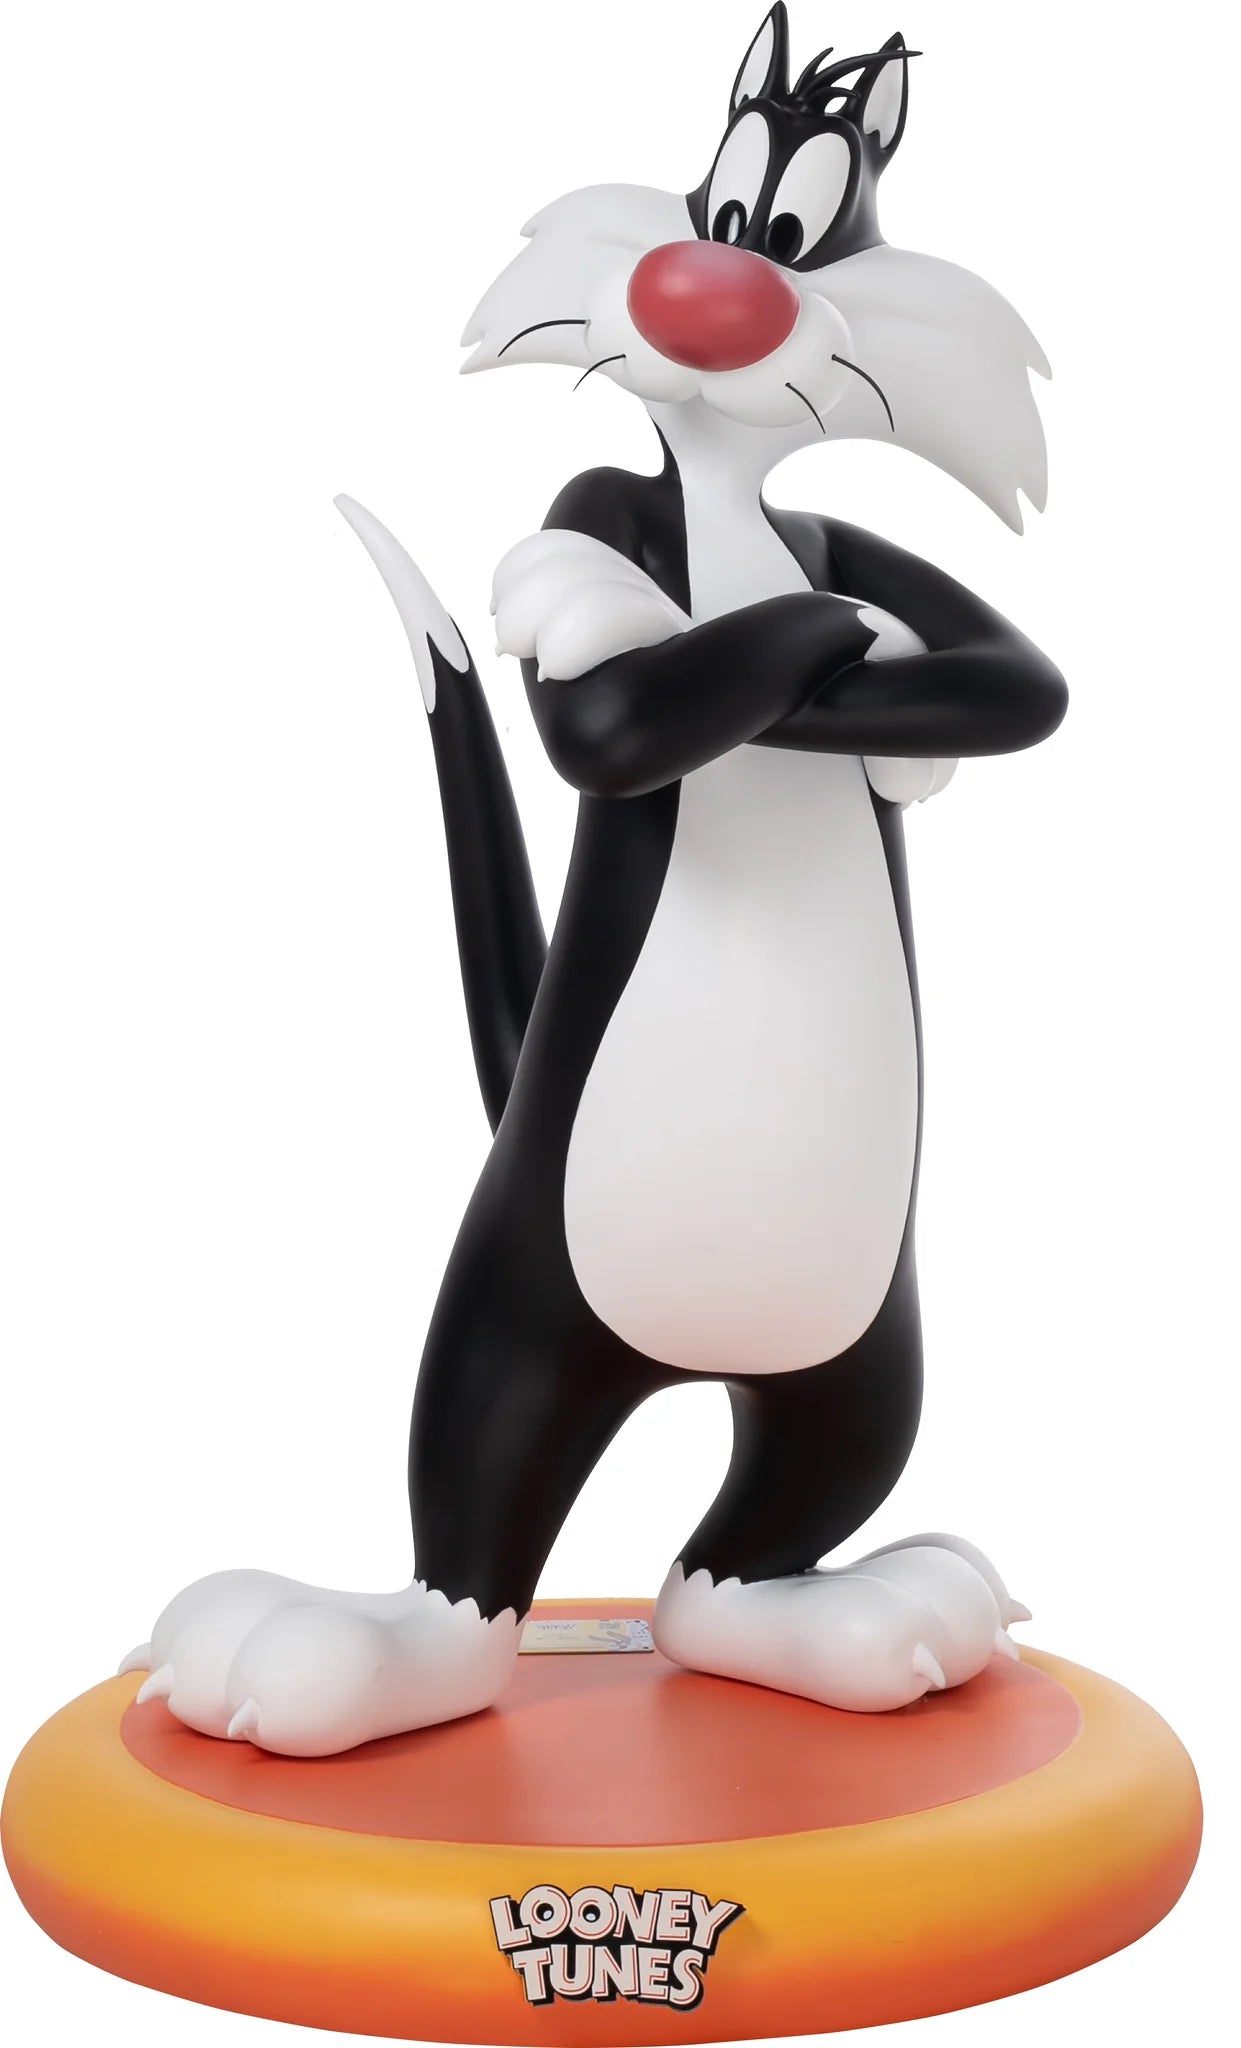 Looney Tunes Sylvester The Cat On Base Life Size Statue - image 1 of 2